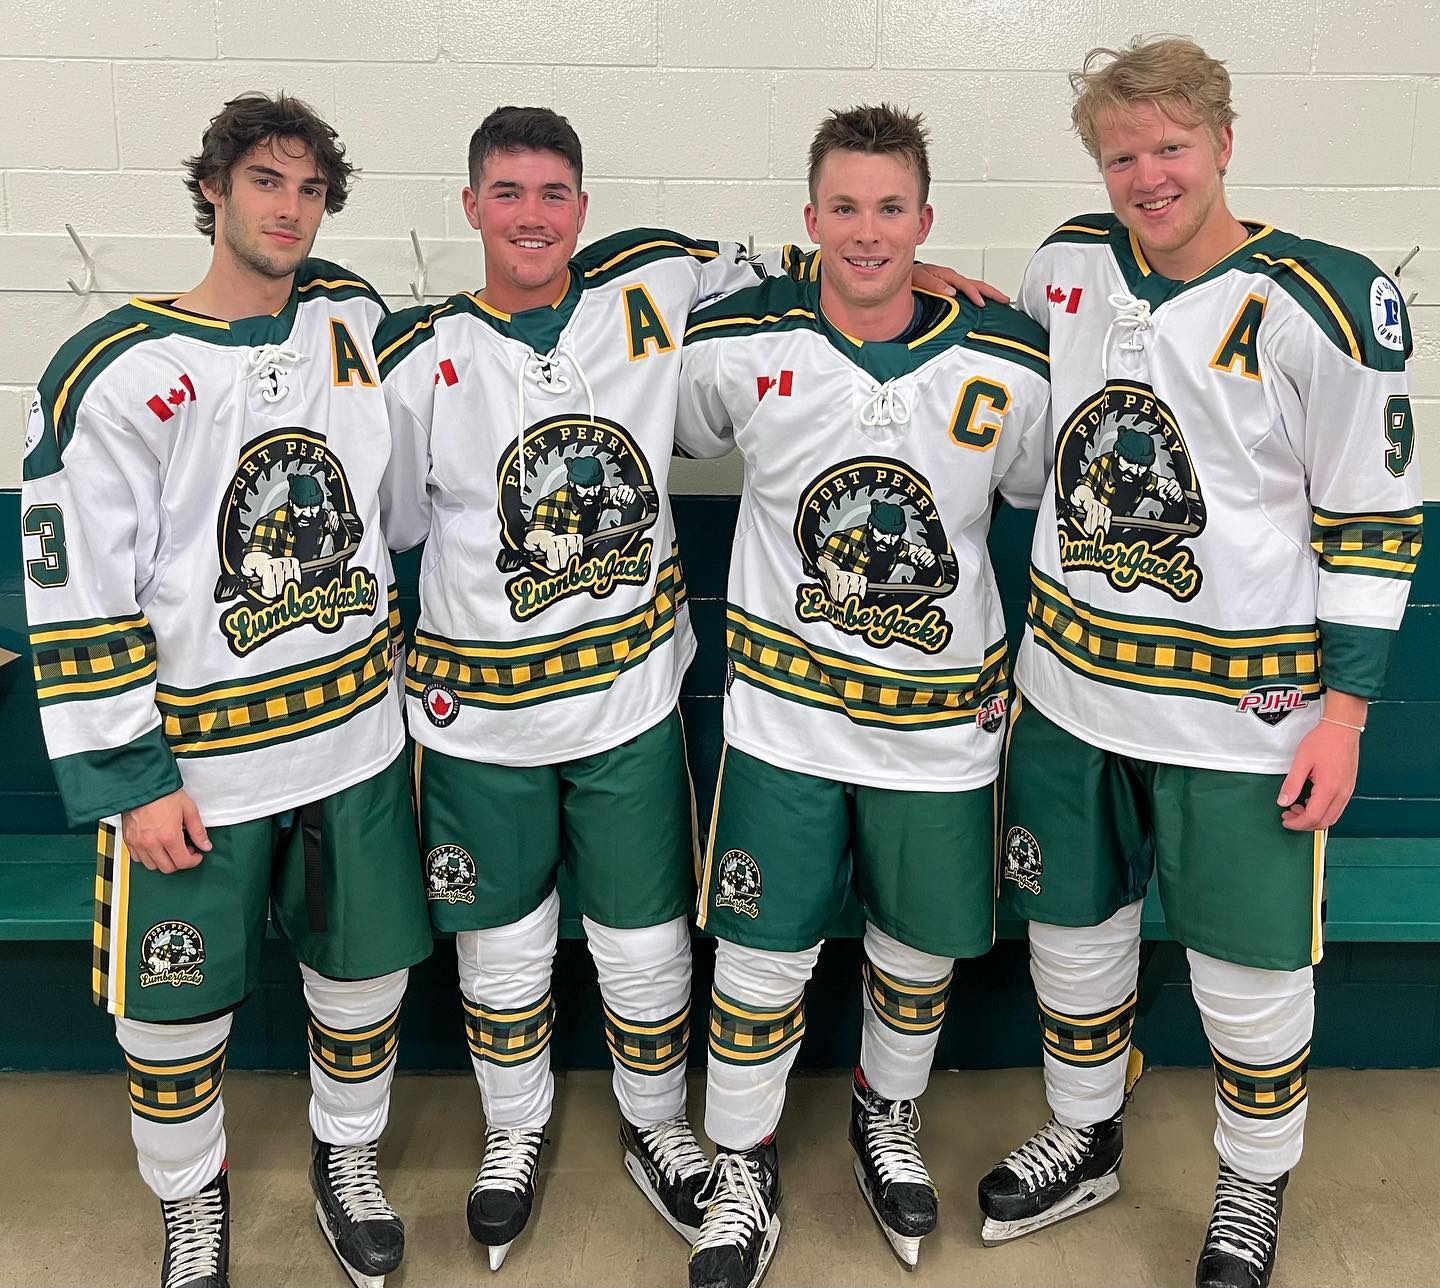 Introducing the 2022-2023 leadership group wearing our new road white uniforms!

Right to left:

AC - Brayden Roberts
AC - Cam Marshall
C - Nolan Goddard
AC - Quinn Arnott